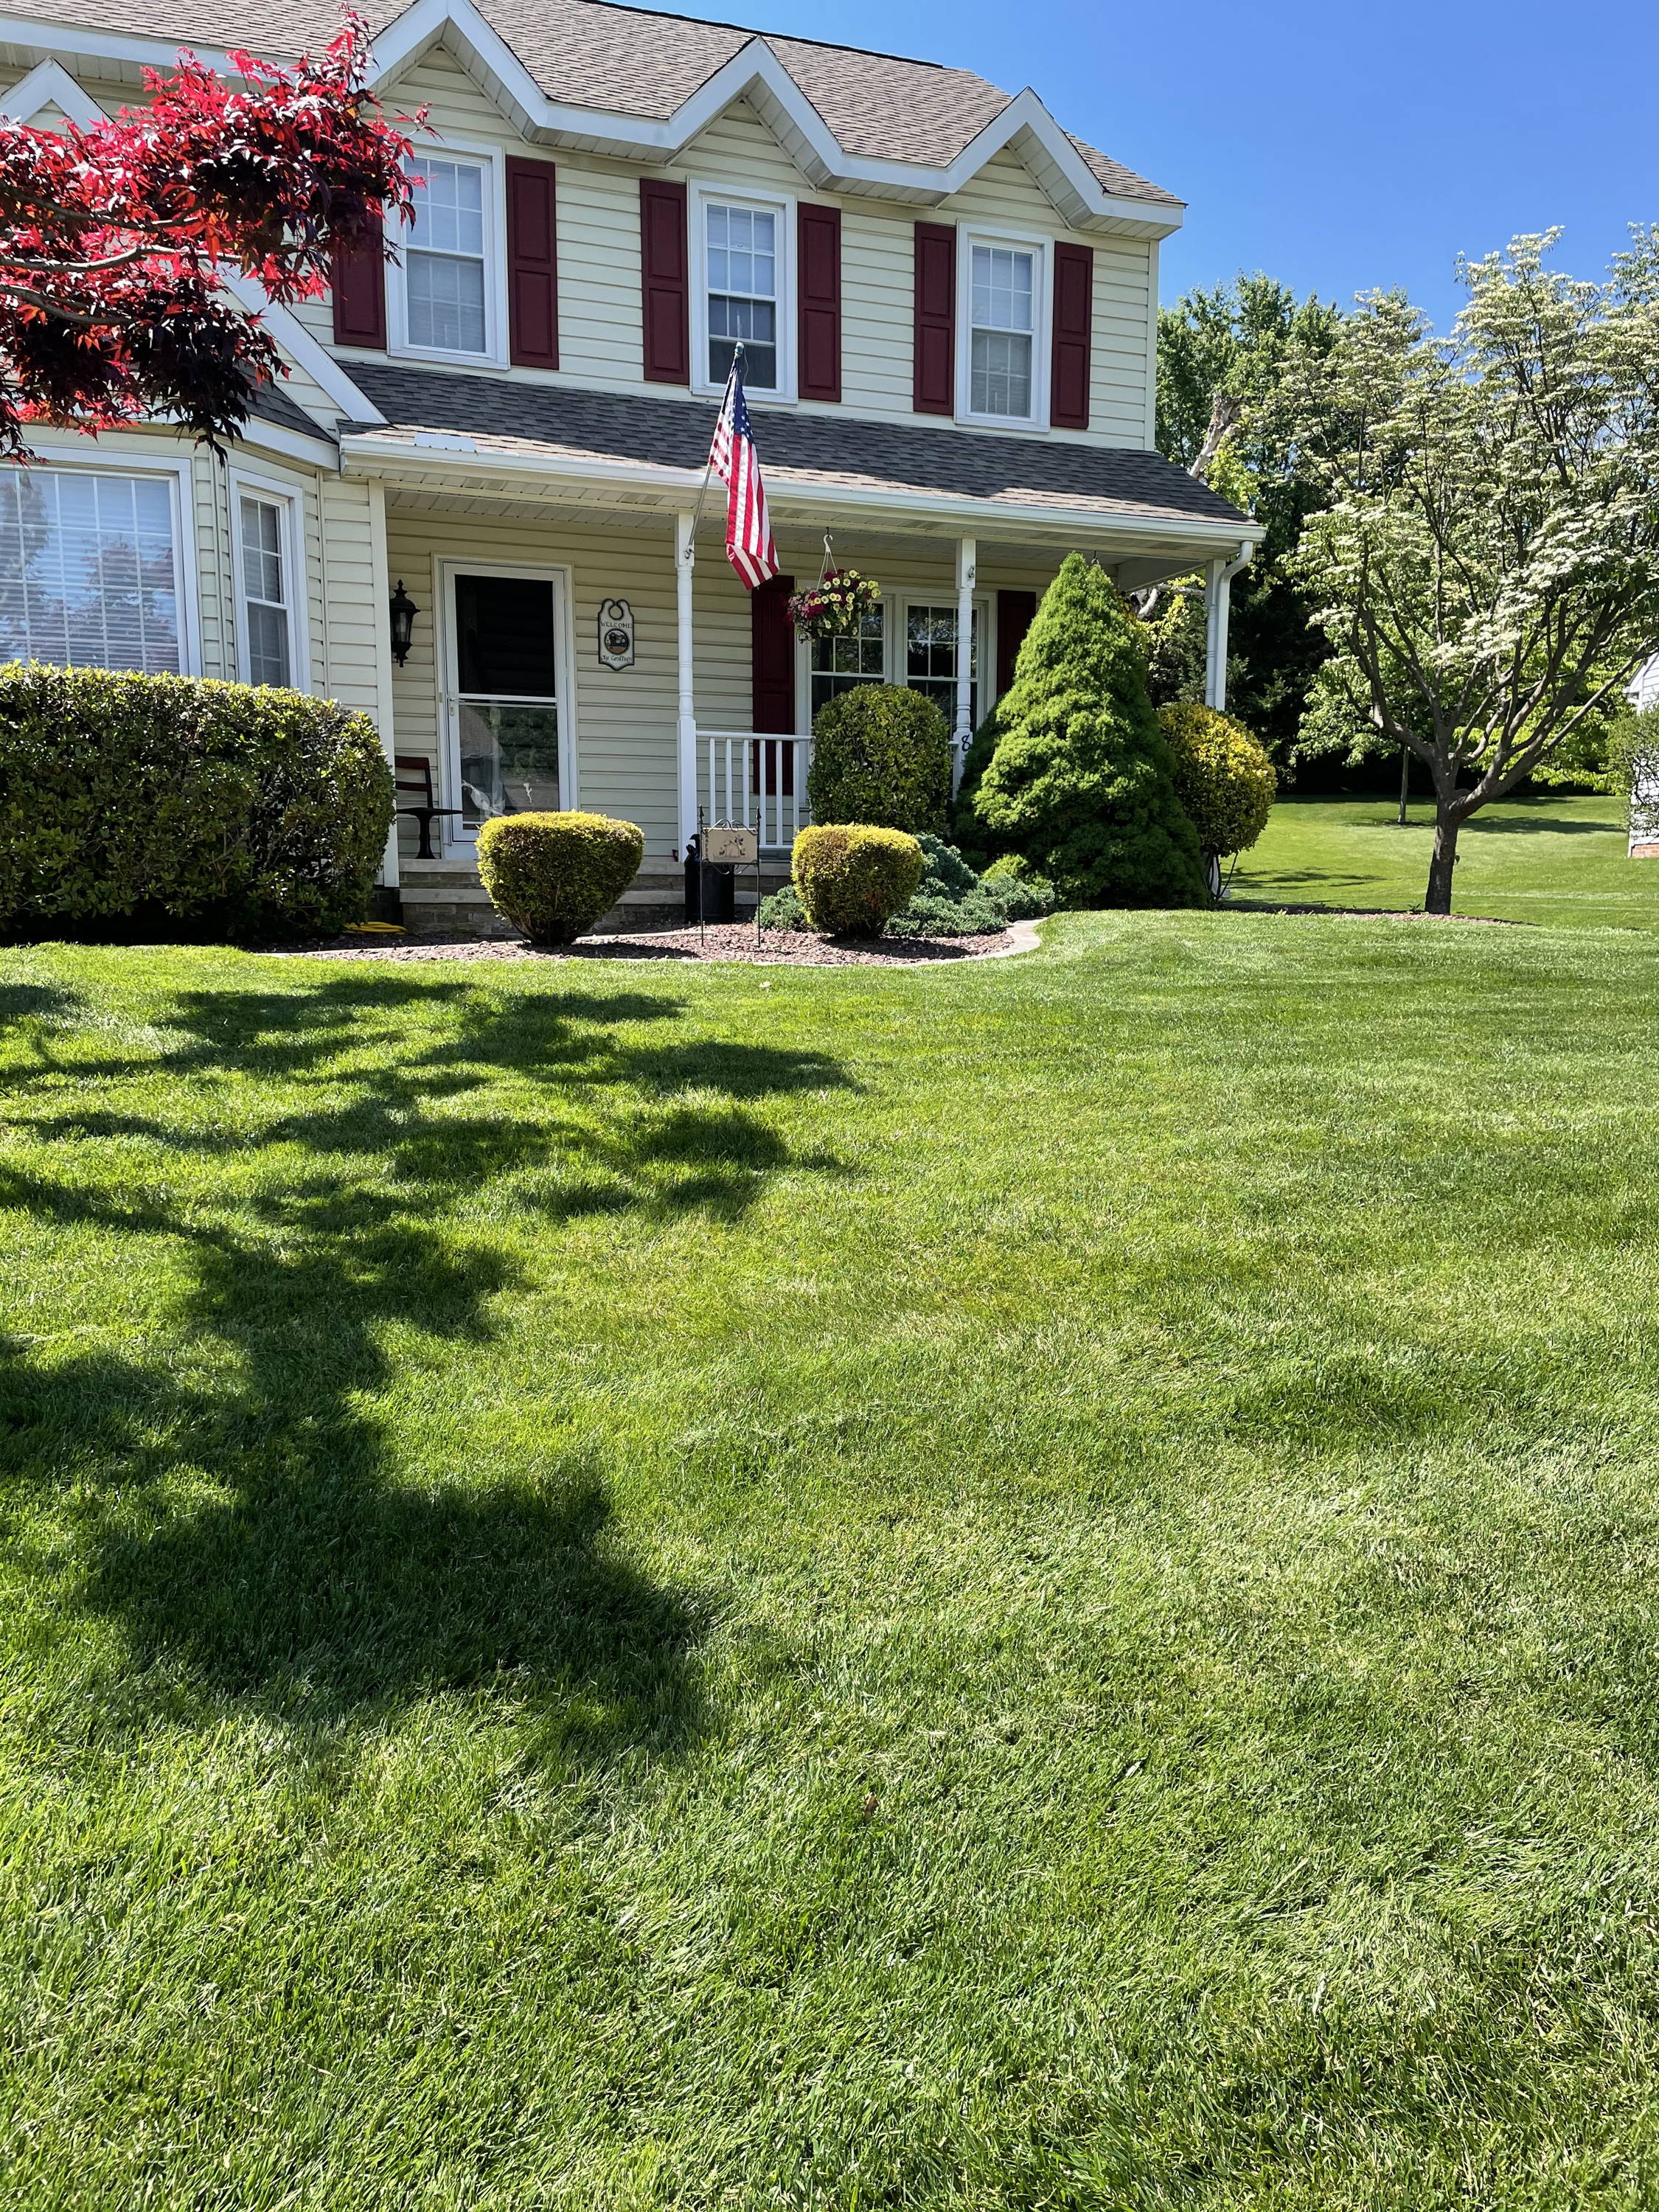 A picture of a house with a pretty lawn